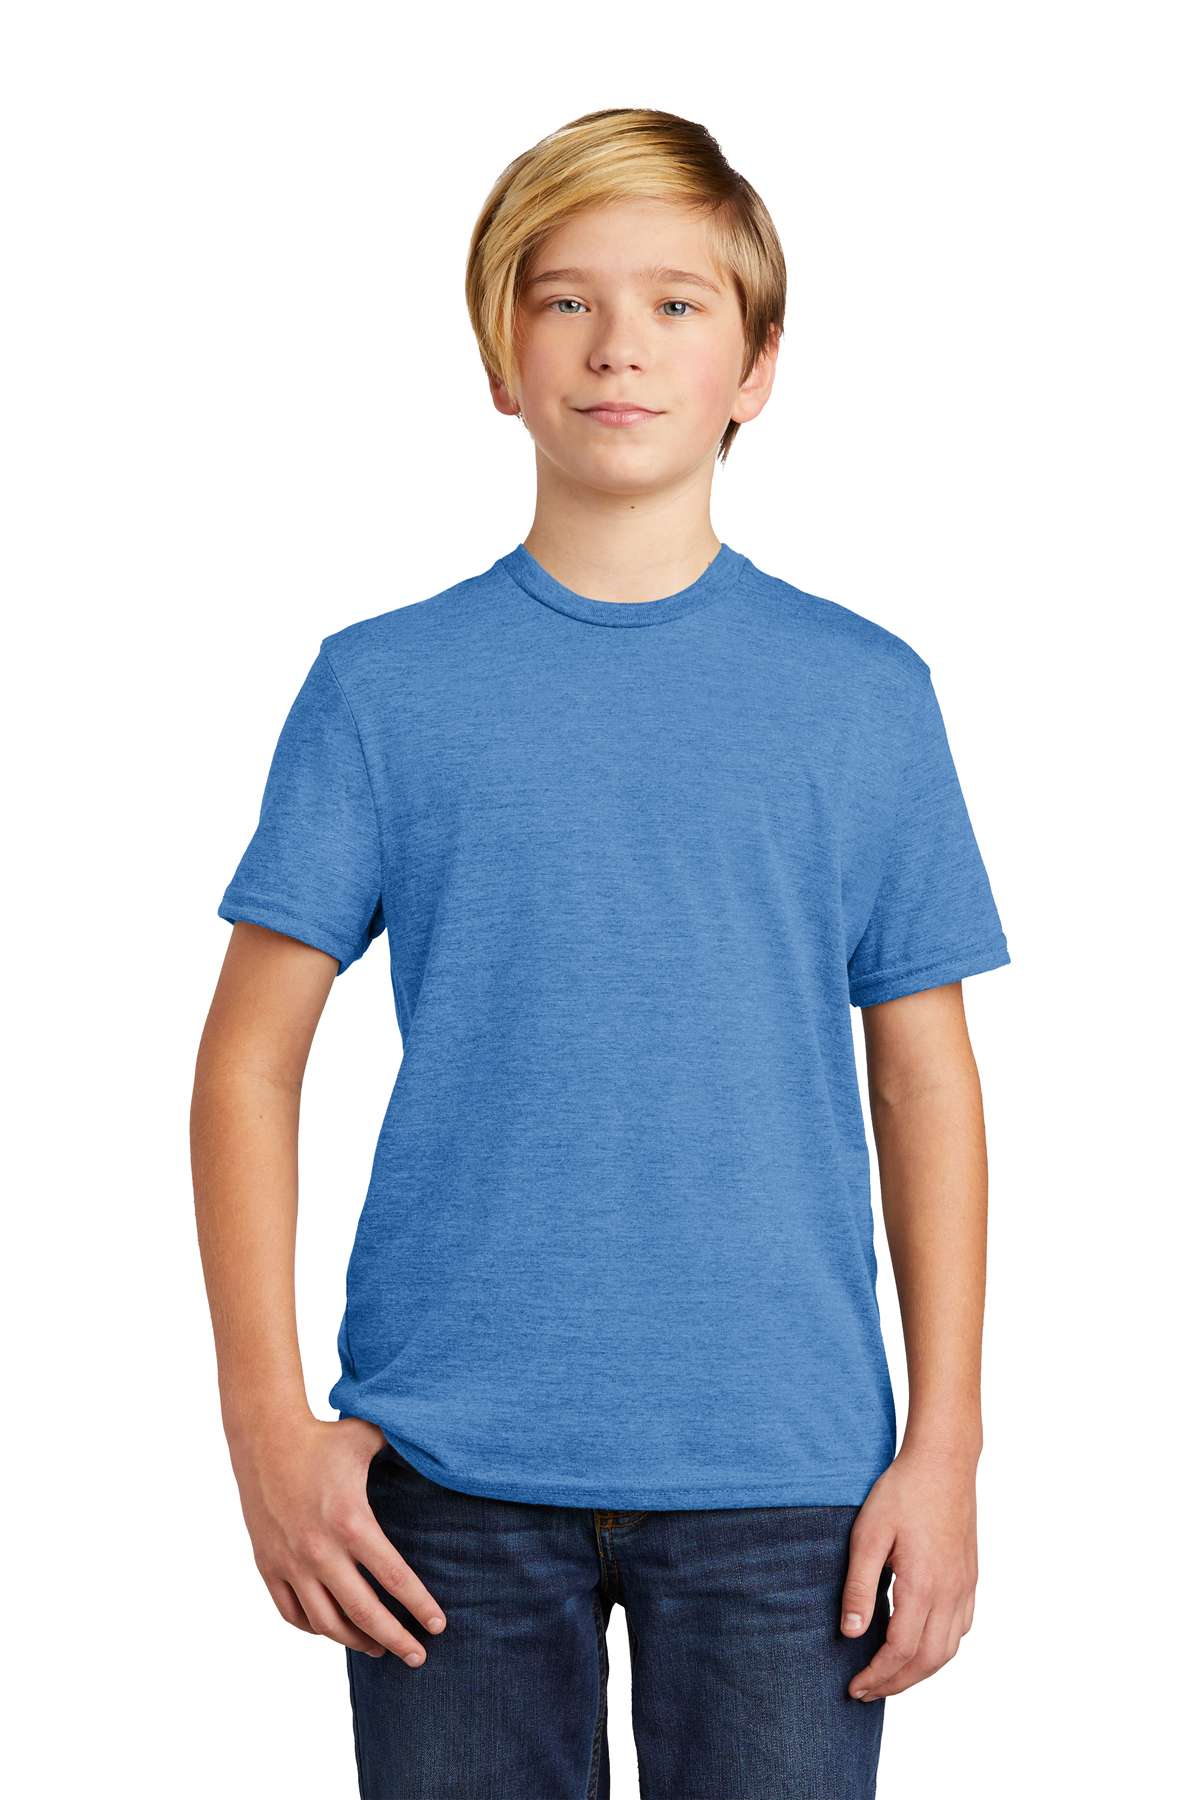 Allmade Youth Tri-Blend Tee | Product | SanMar